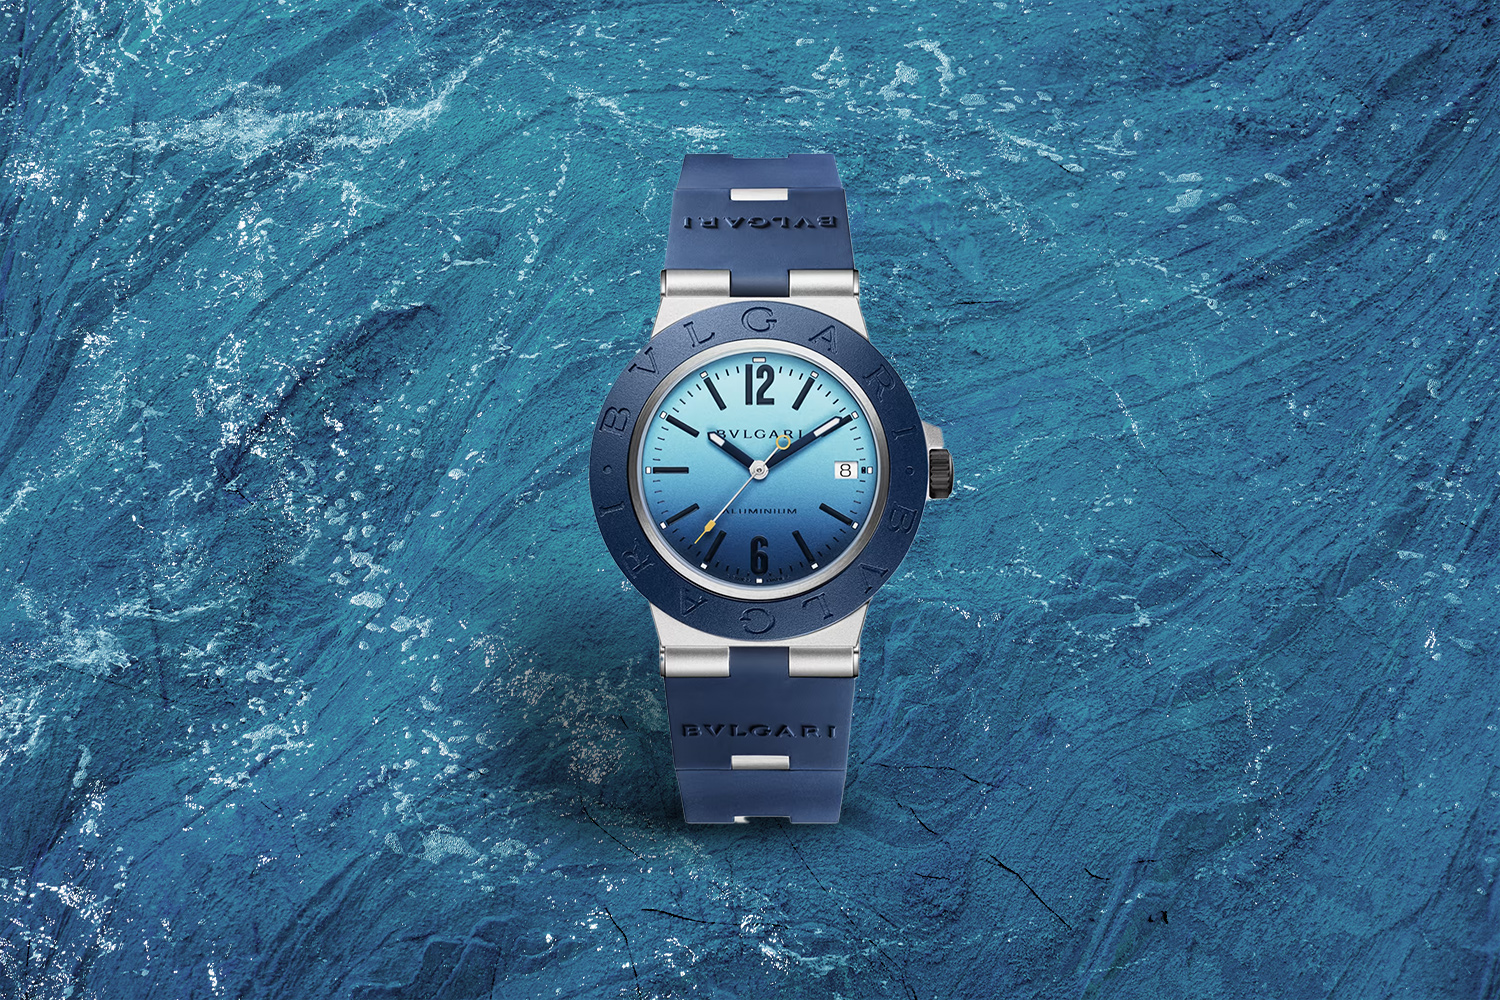 dark blue and silver watch with light blue to dark blue gradient on the watch face